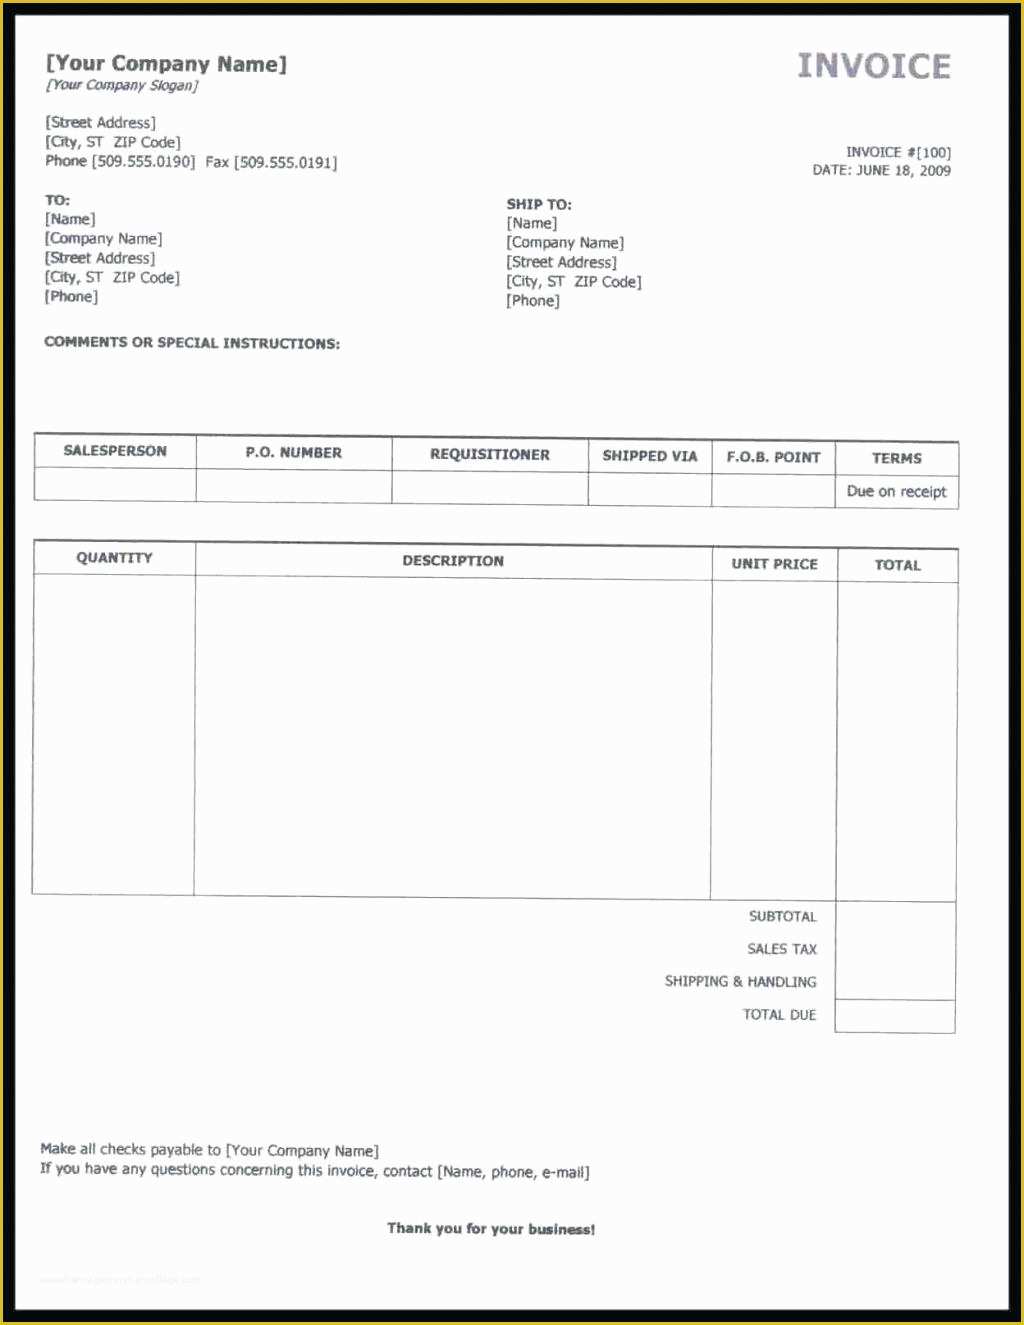 Timesheet Invoice Template Free Of Template Timesheet Invoice Template